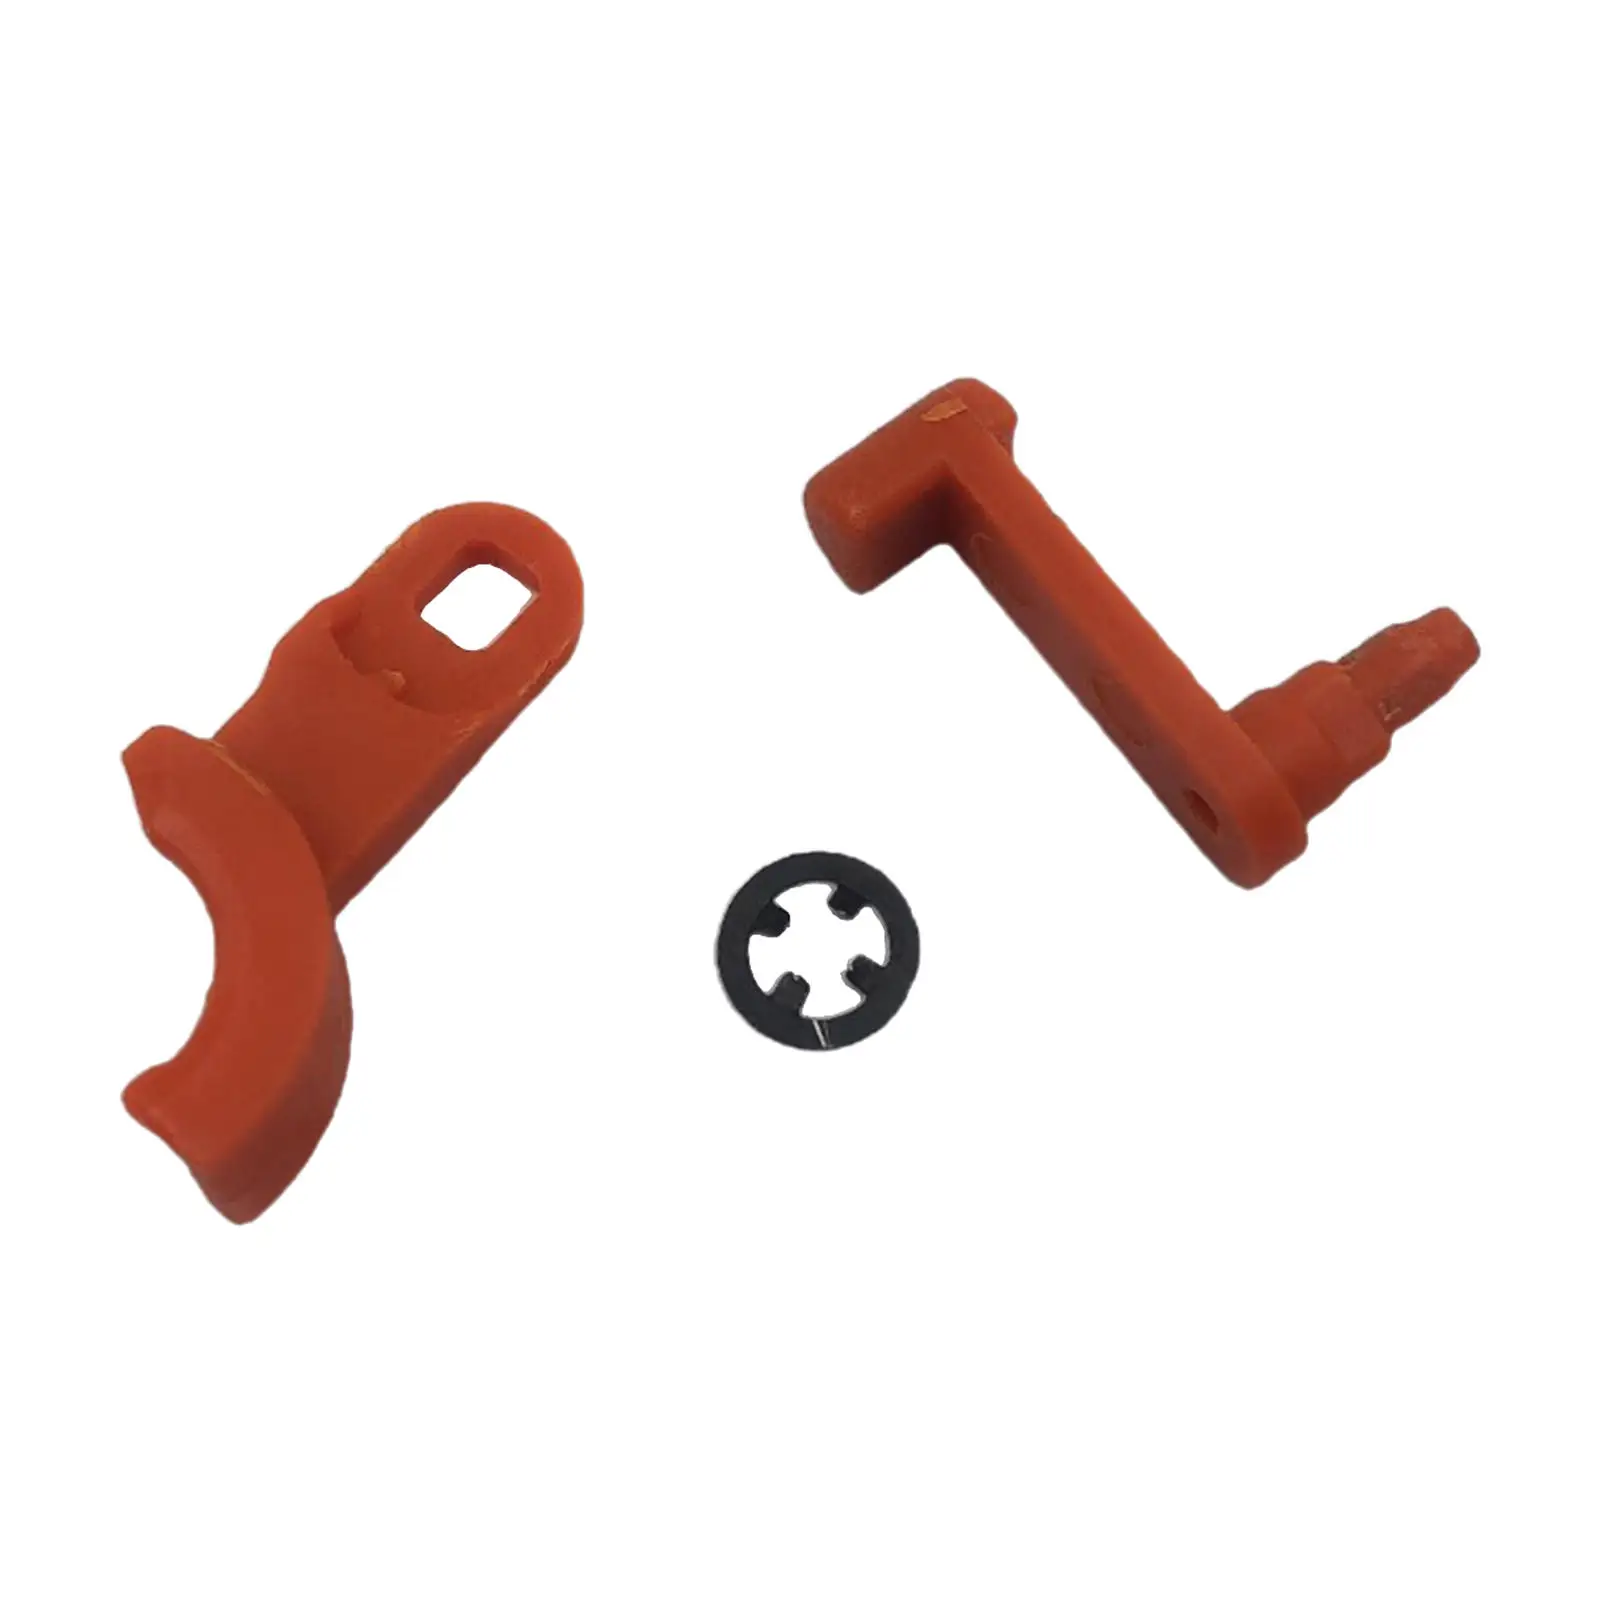 MagiDeal Choke Lever Shutter Clip Kit Replacement suitable for Stihl FS55 FS38 4140-141-3700 